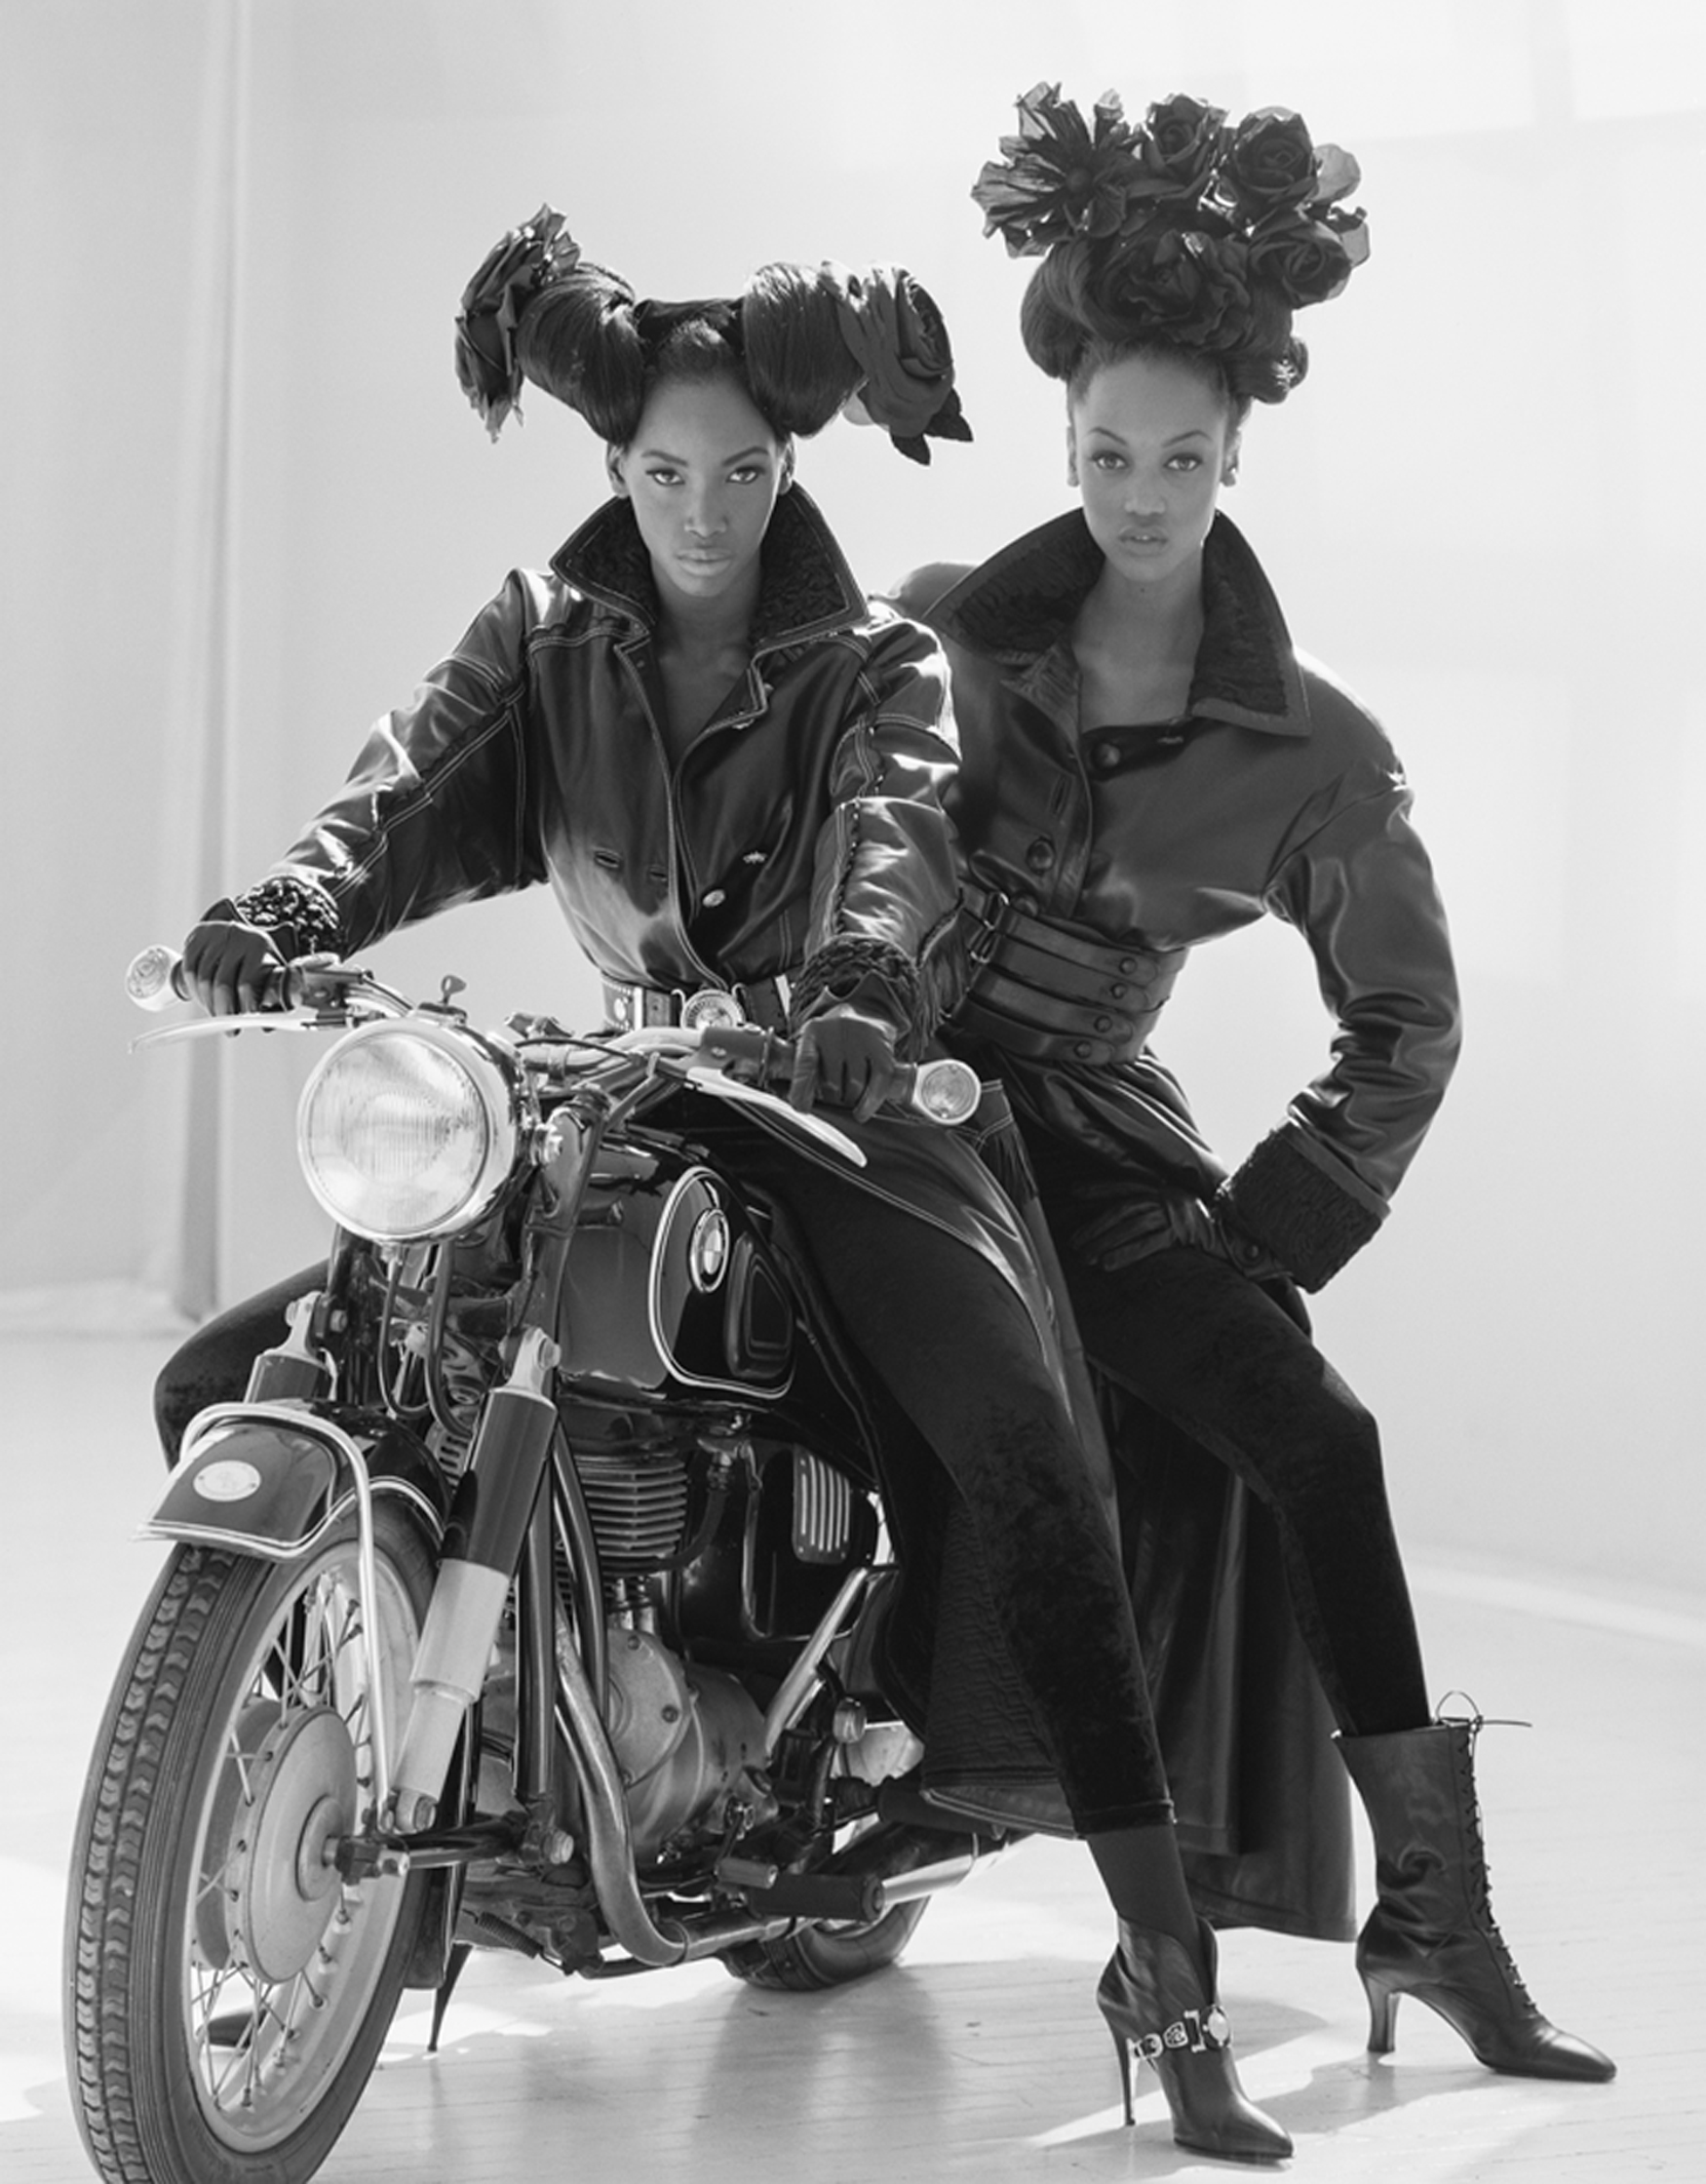 Beverly Peele and Tyra Banks posing on a motorcycle in leather jackets by arthur elgort 1993